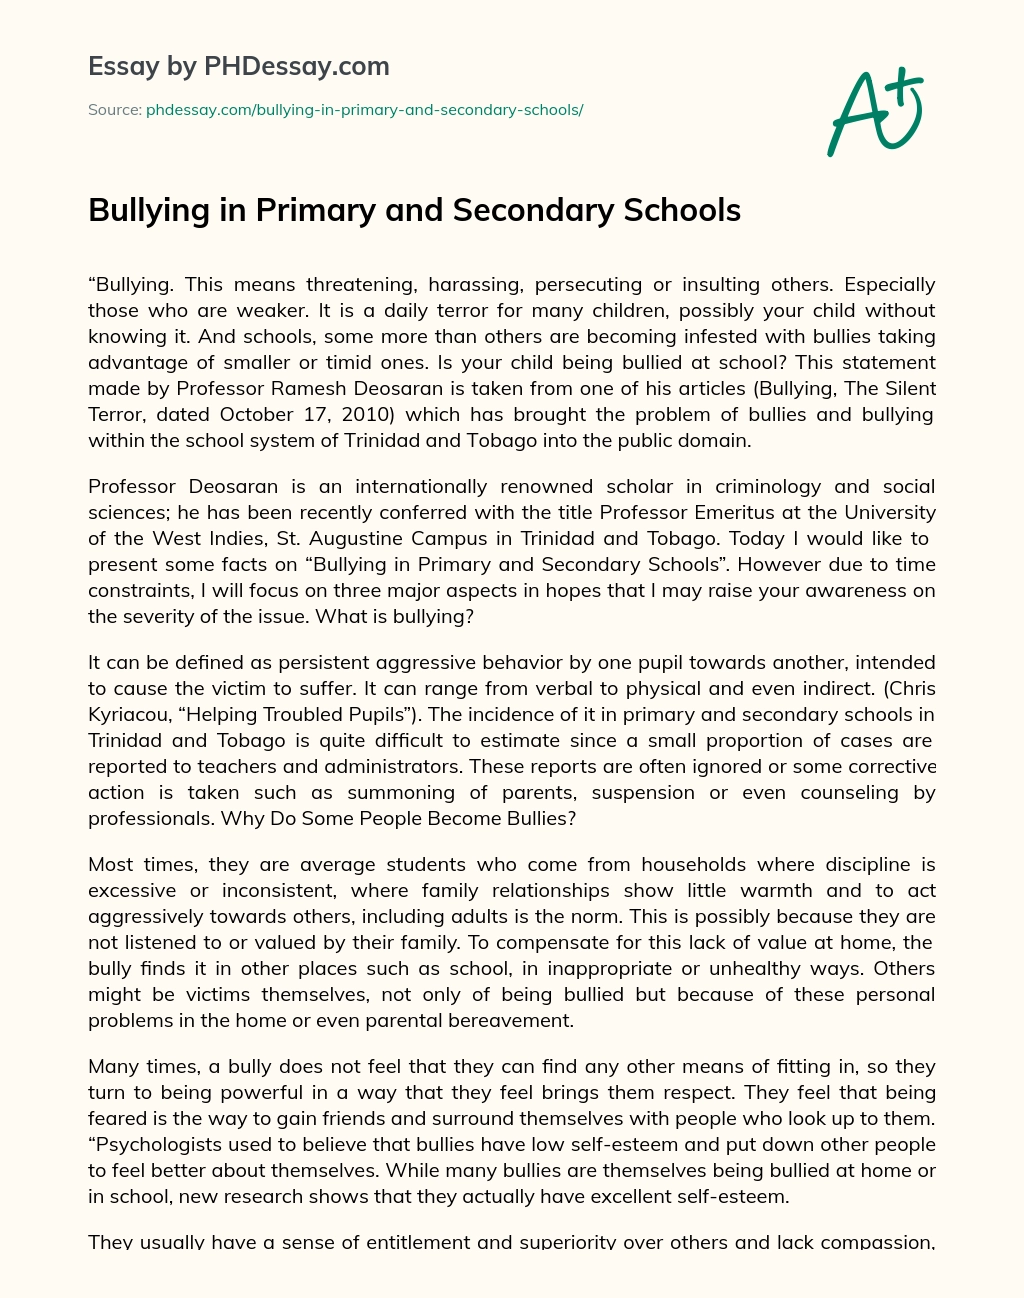 Bullying in Primary and Secondary Schools essay